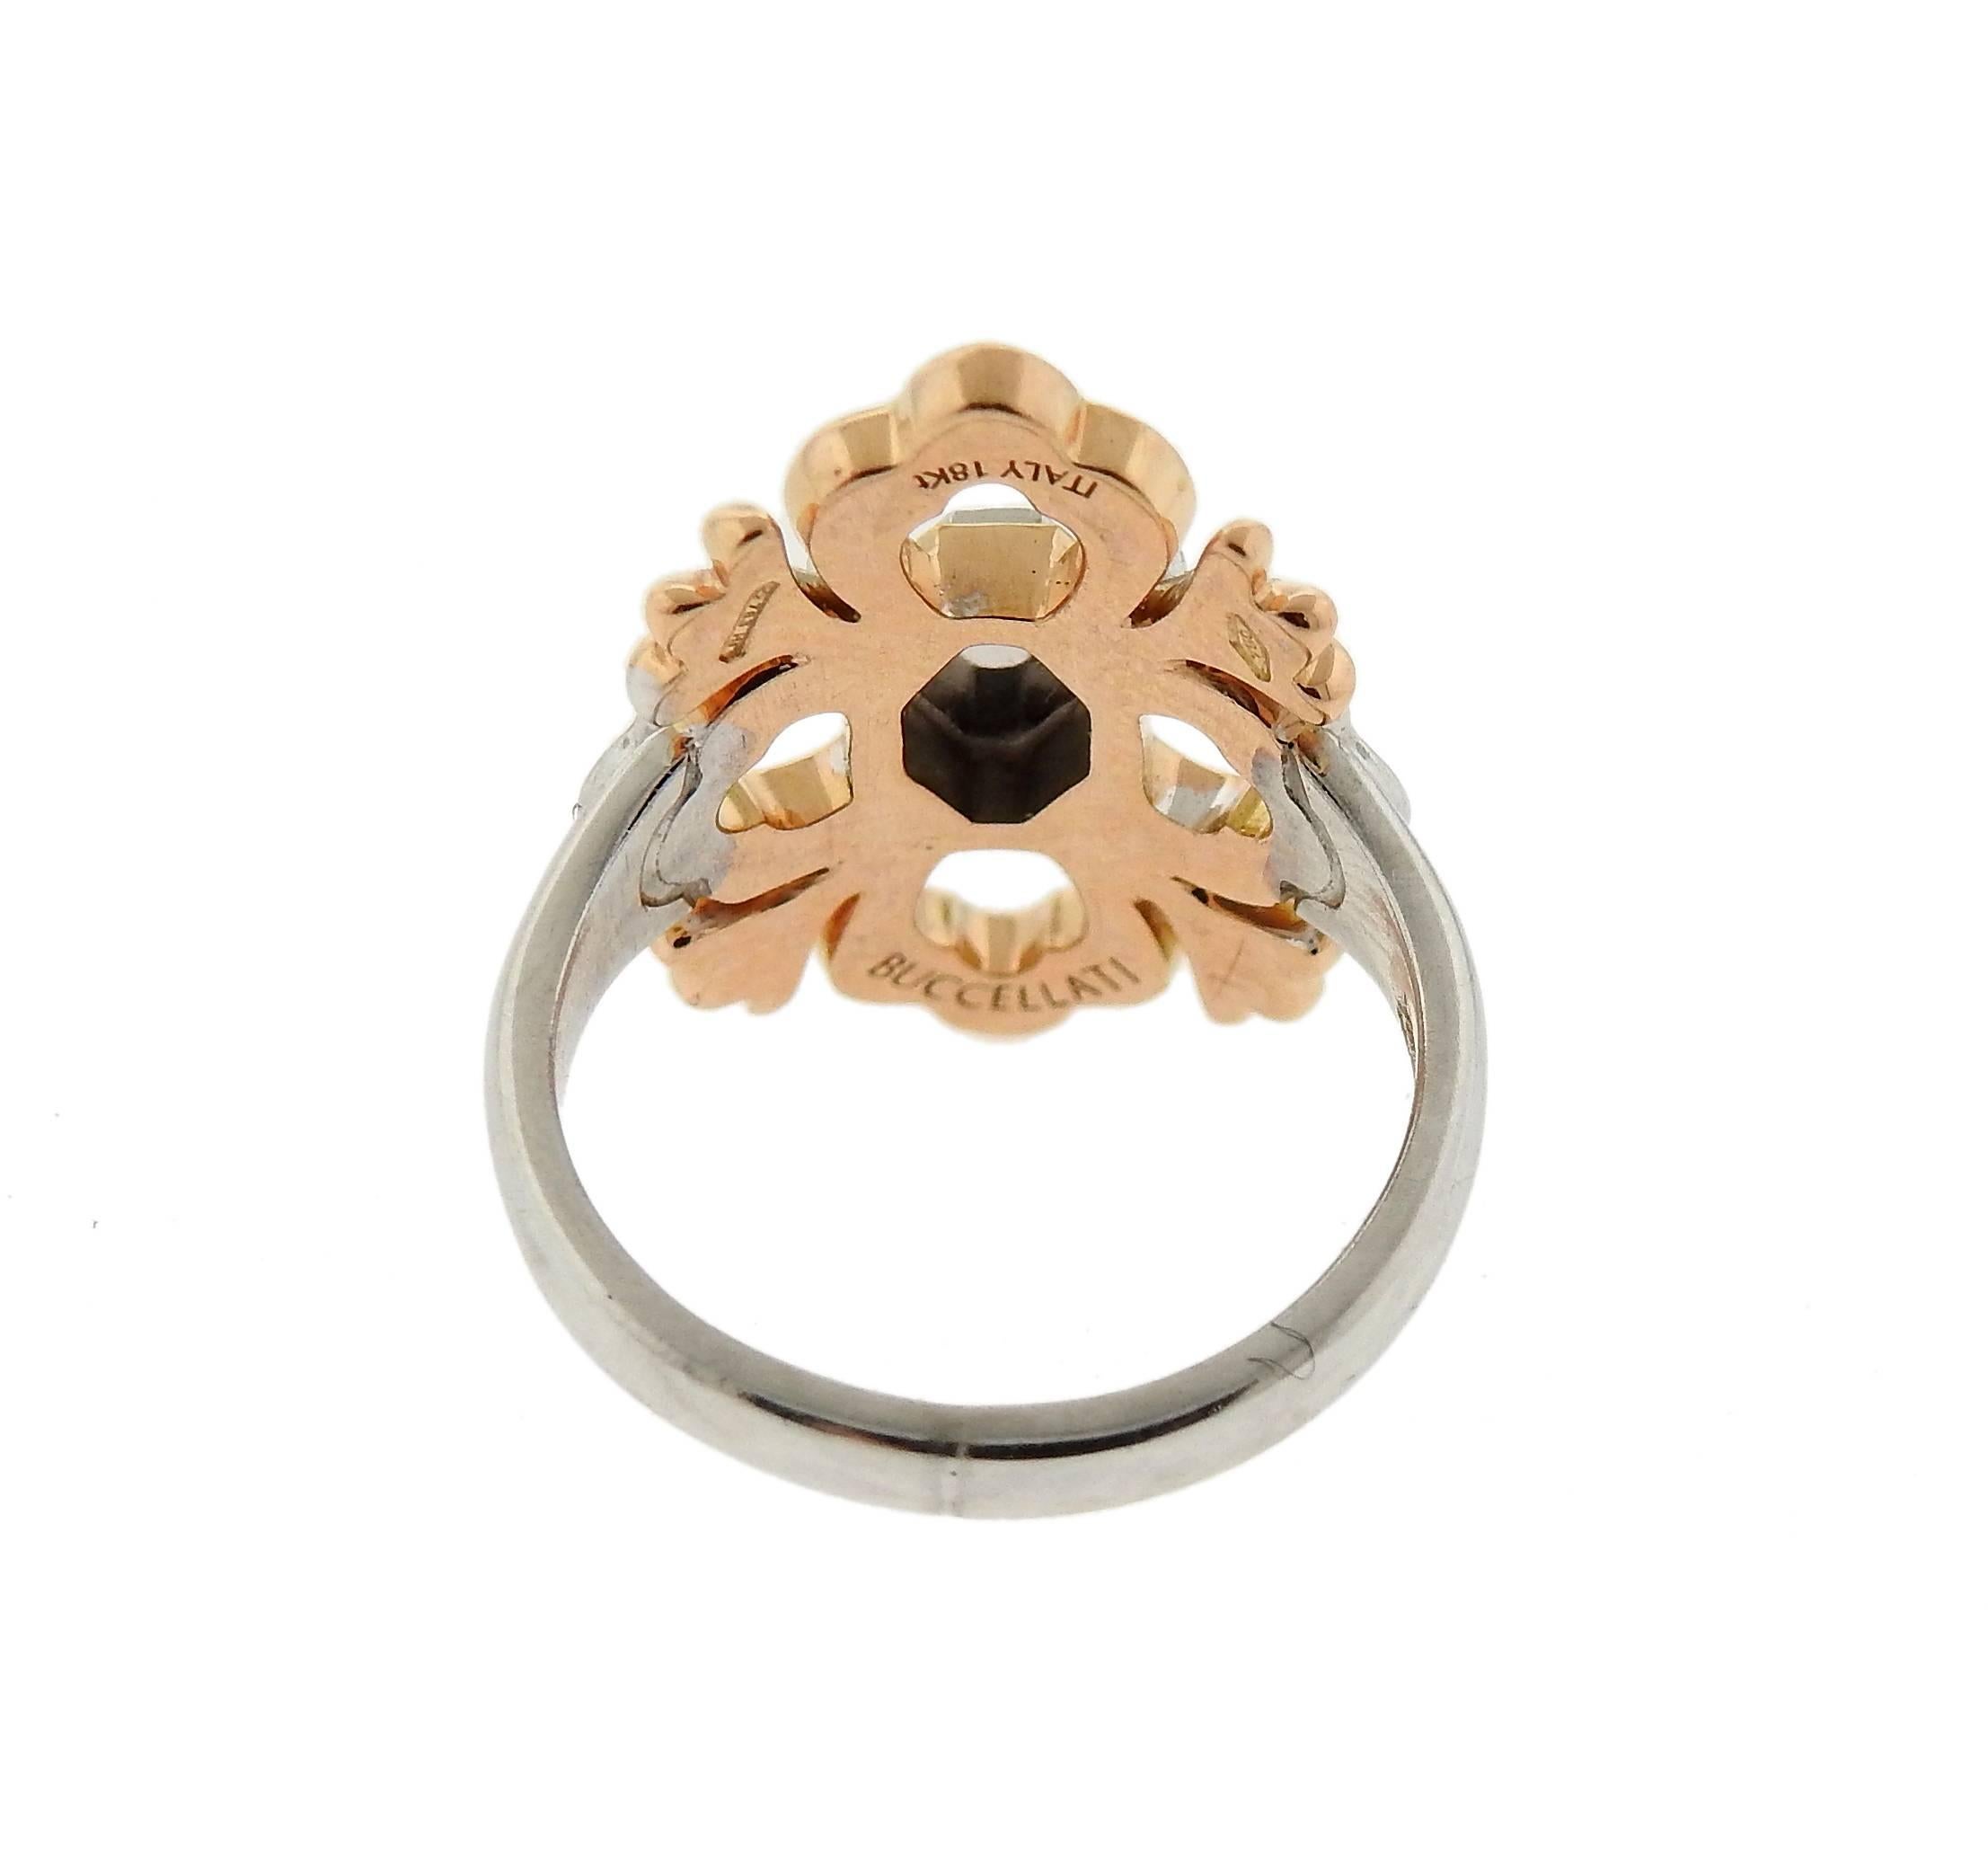 18k white and rose gold Opera ring, crafted by Buccellati. Ring size - 5, ring top is 20mm x 15mm  . Marked: Buccellati, Italy, 18k. Weight of the piece - 6.4 grams 